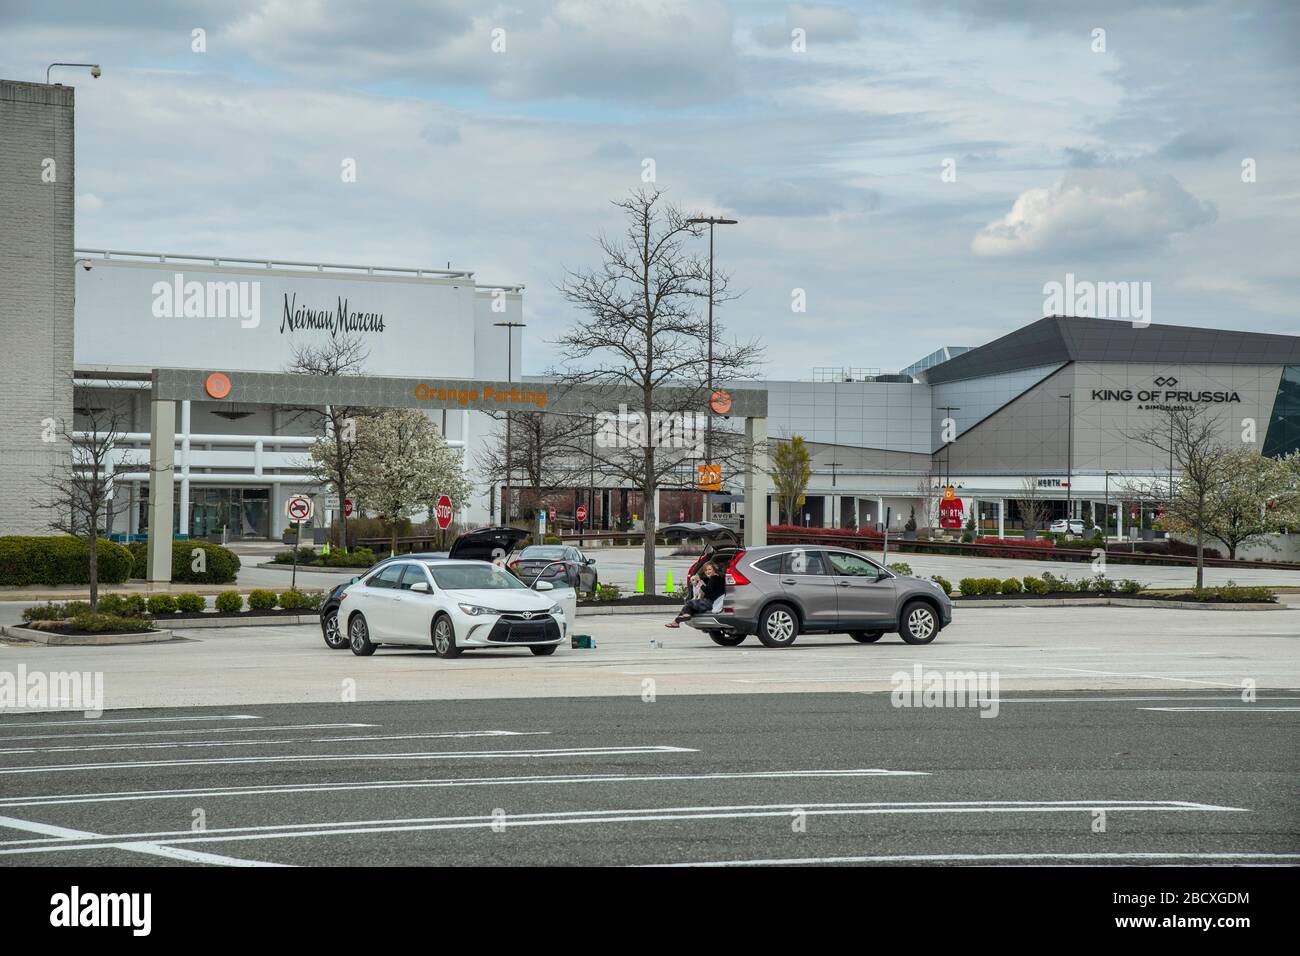 People practicing safe social distancing due to Coronavirus Covid-19 in parking lot of closed King Of Prussia Mall, Pennsylvania, USA Stock Photo